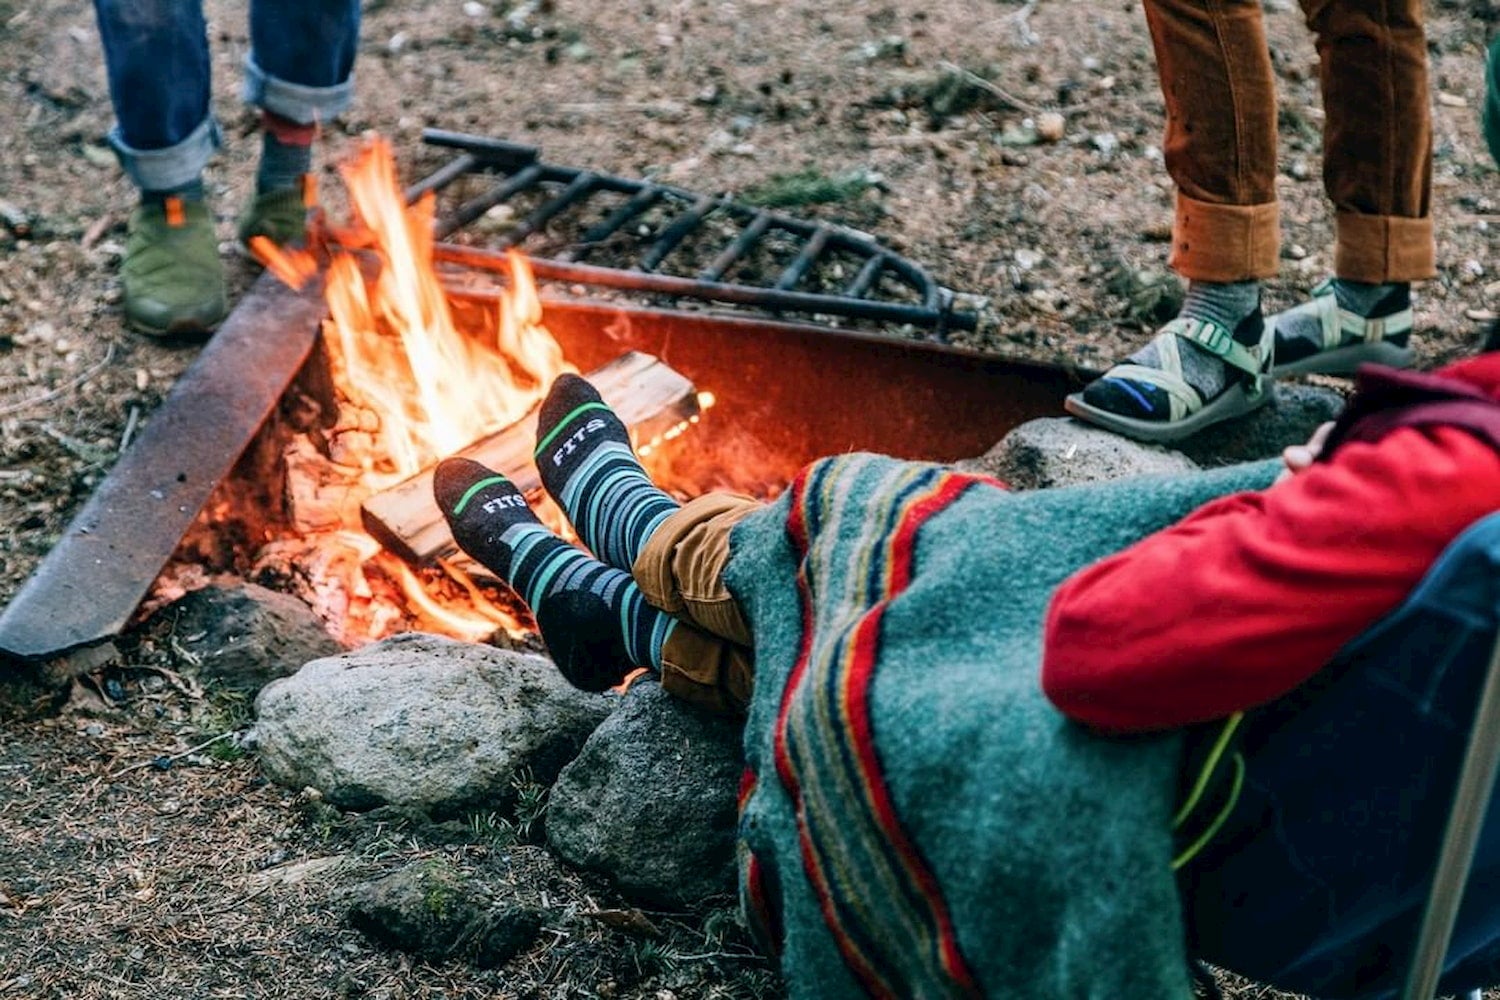 Wool hiking socks used while camping beside a fire.